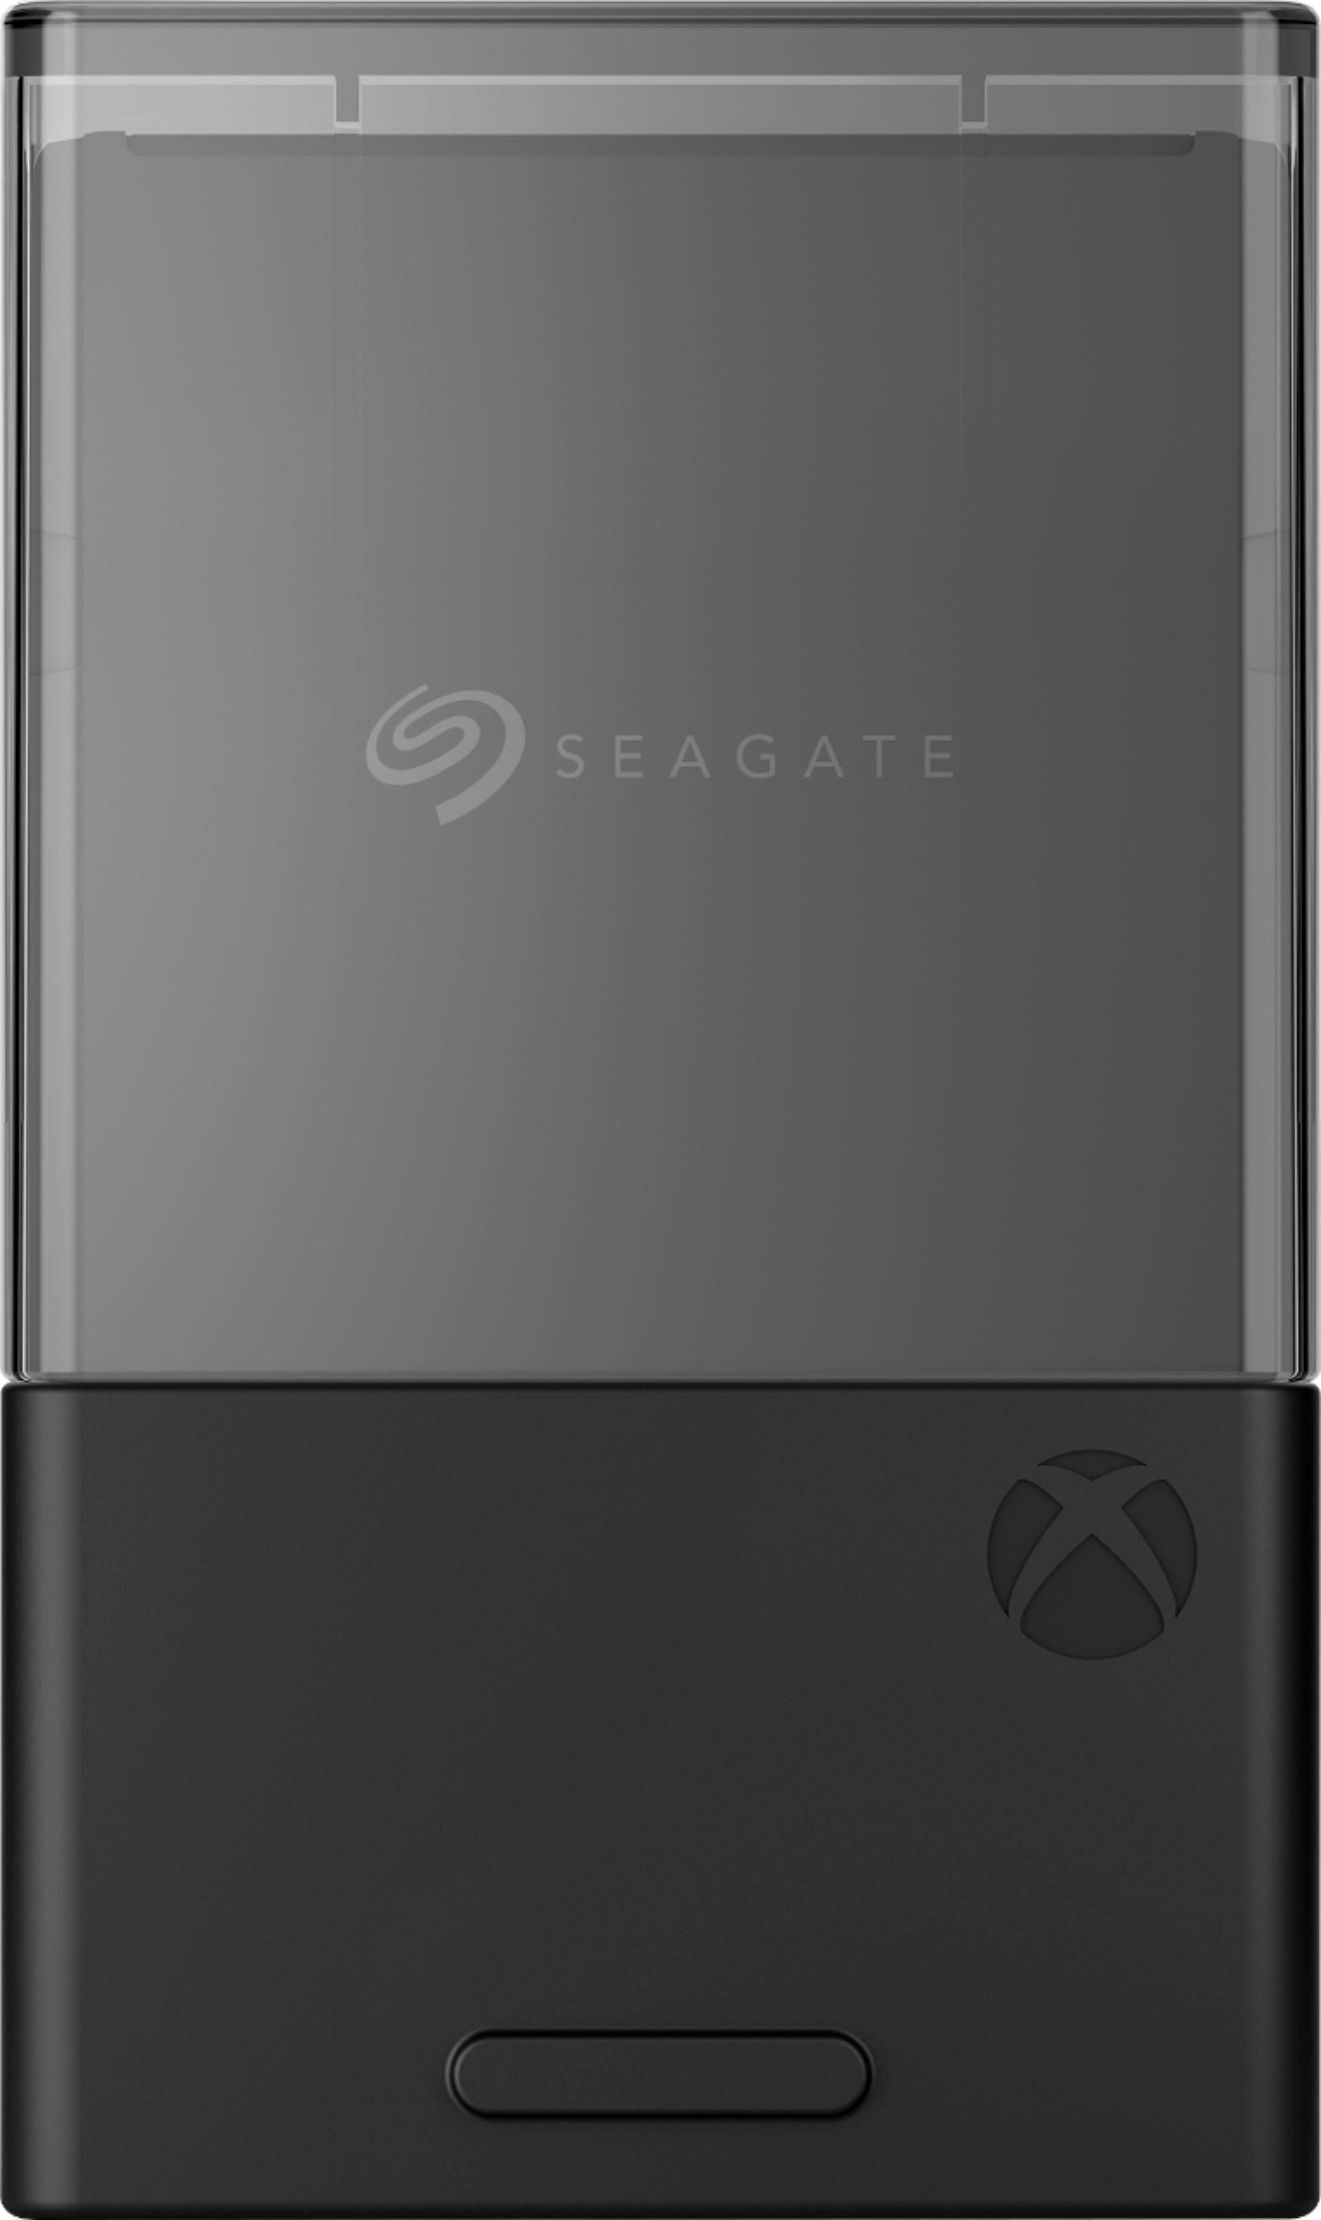 Seagate 1TB Storage Expansion Card for Xbox Series X|S Internal NVMe SSD  Black STJR1000400 - Best Buy